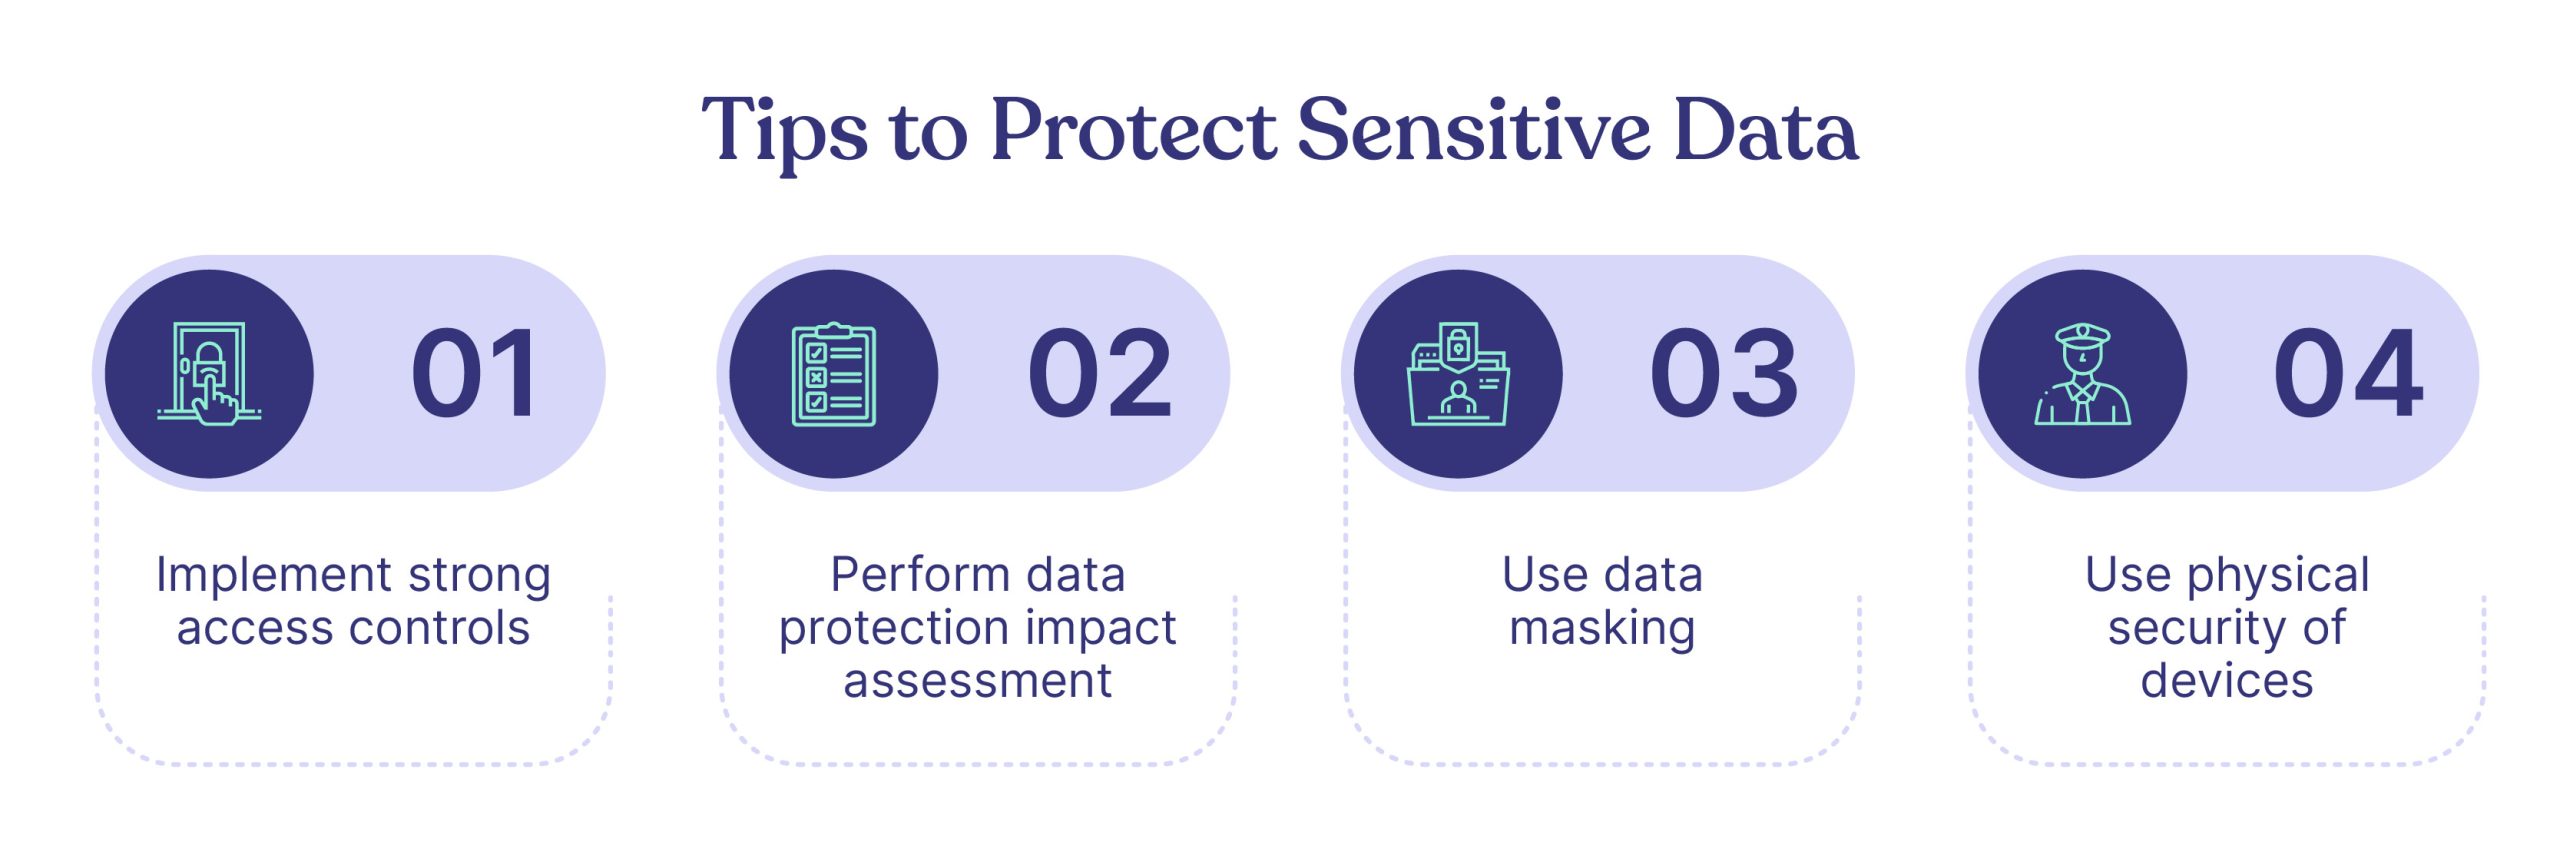 Tips to Protect Sensitive Data 